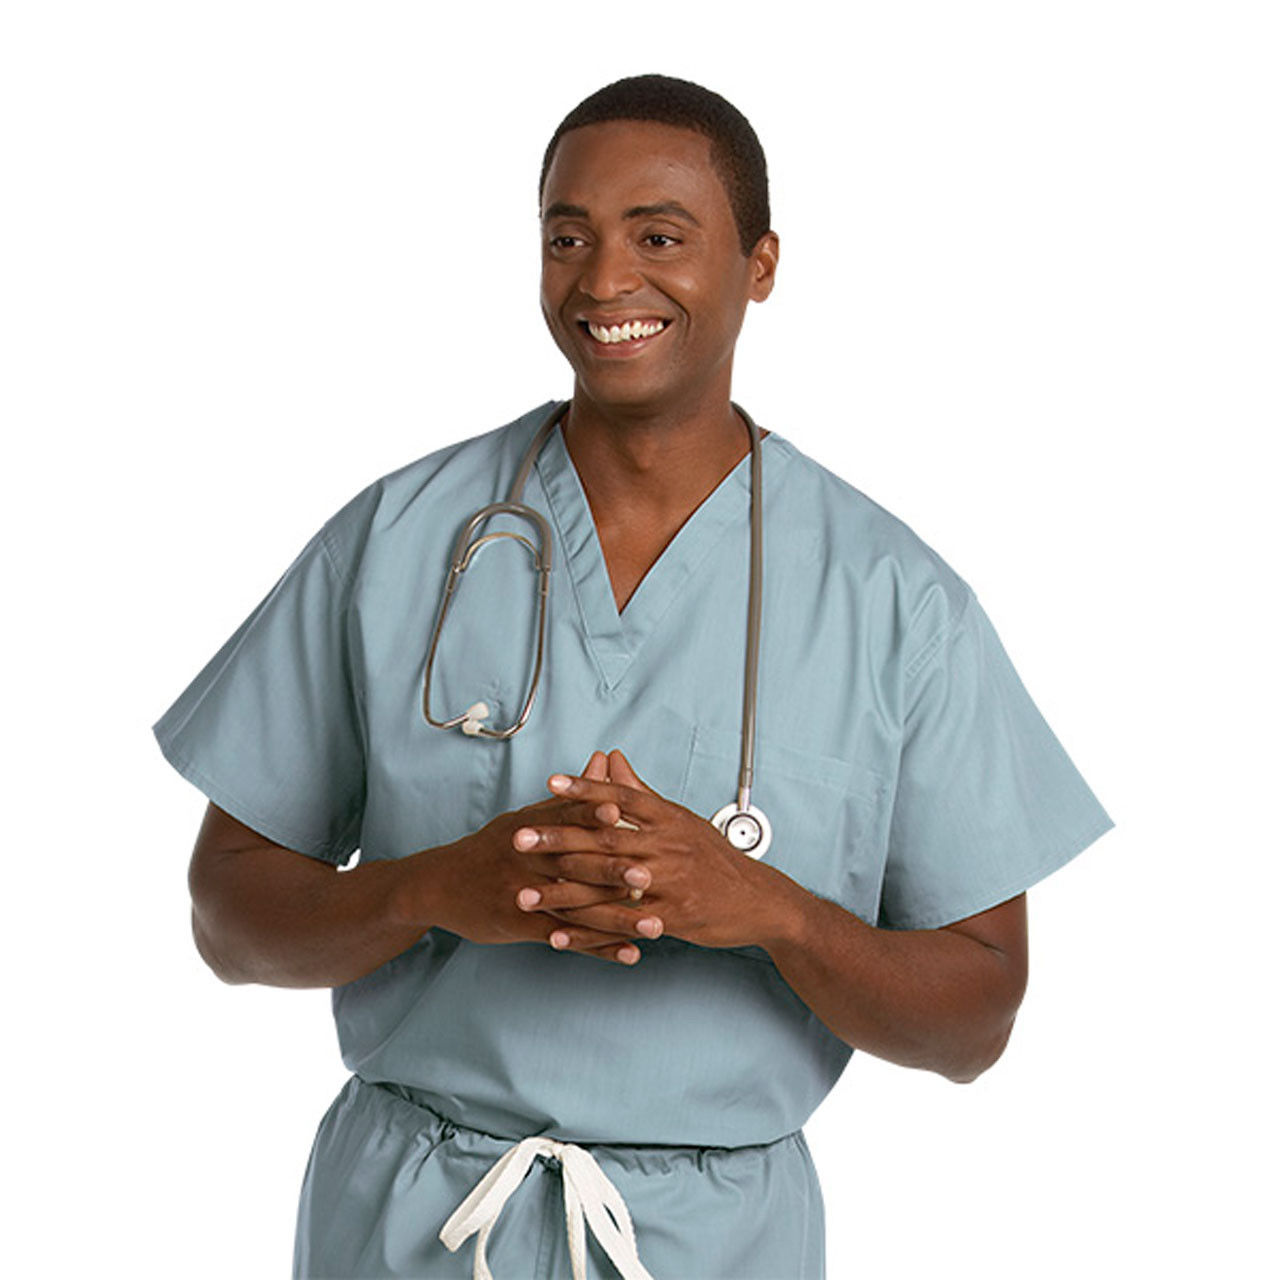 Unisex Reversible Surgical Scrubs in Bulk, with Pocket, Misty Green - 12 or 72 Questions & Answers